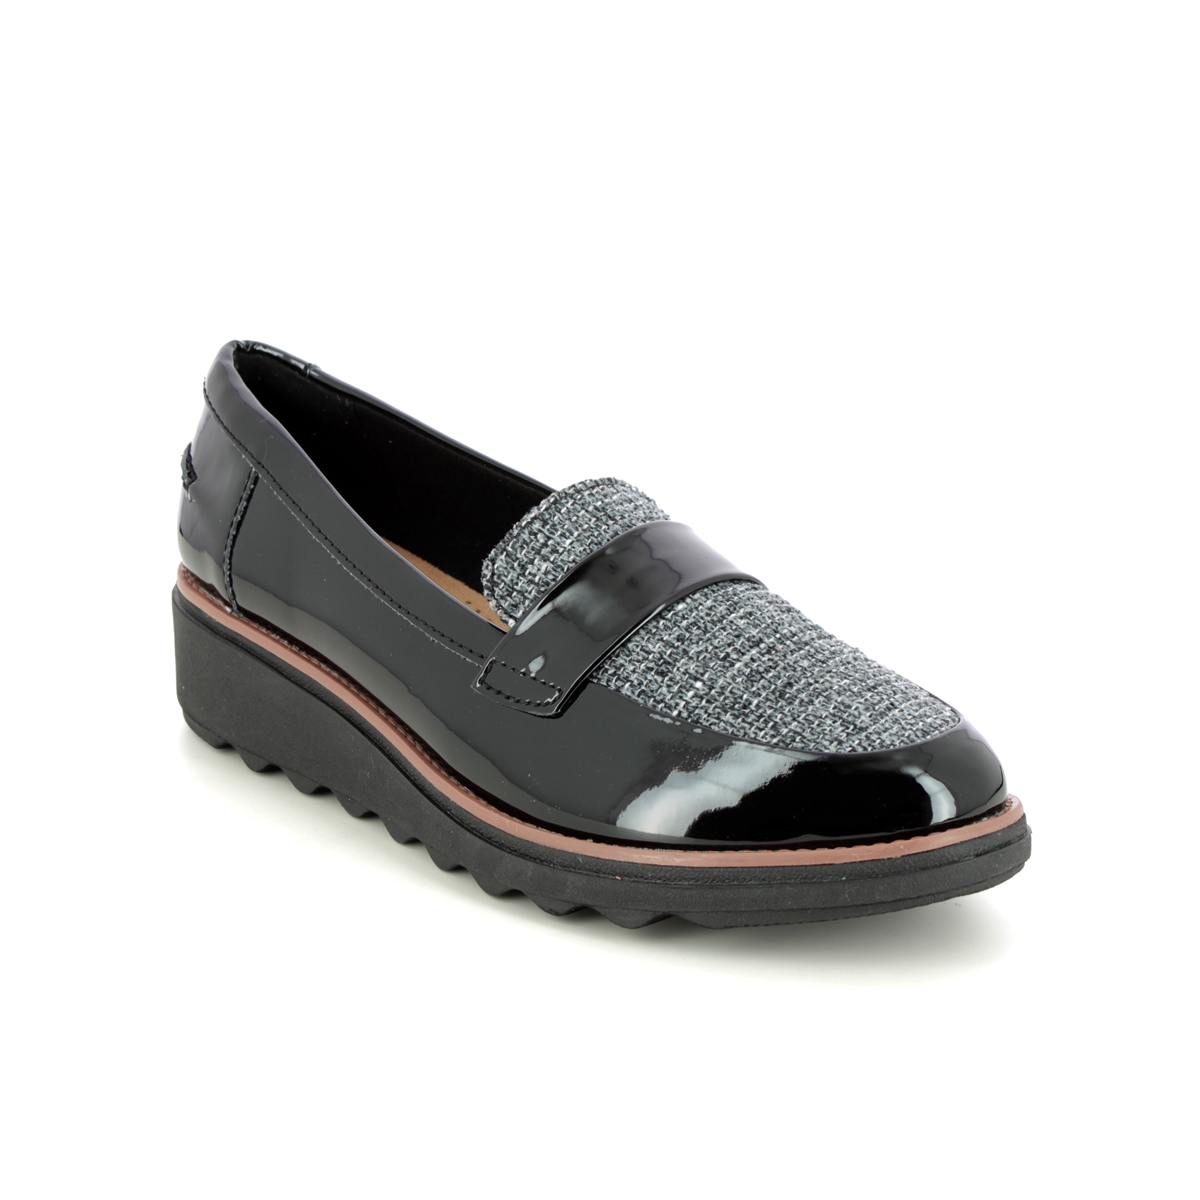 Clarks Sharon Gracie Black Patent Womens Loafers 640824D In Size 8 In Plain Black Patent